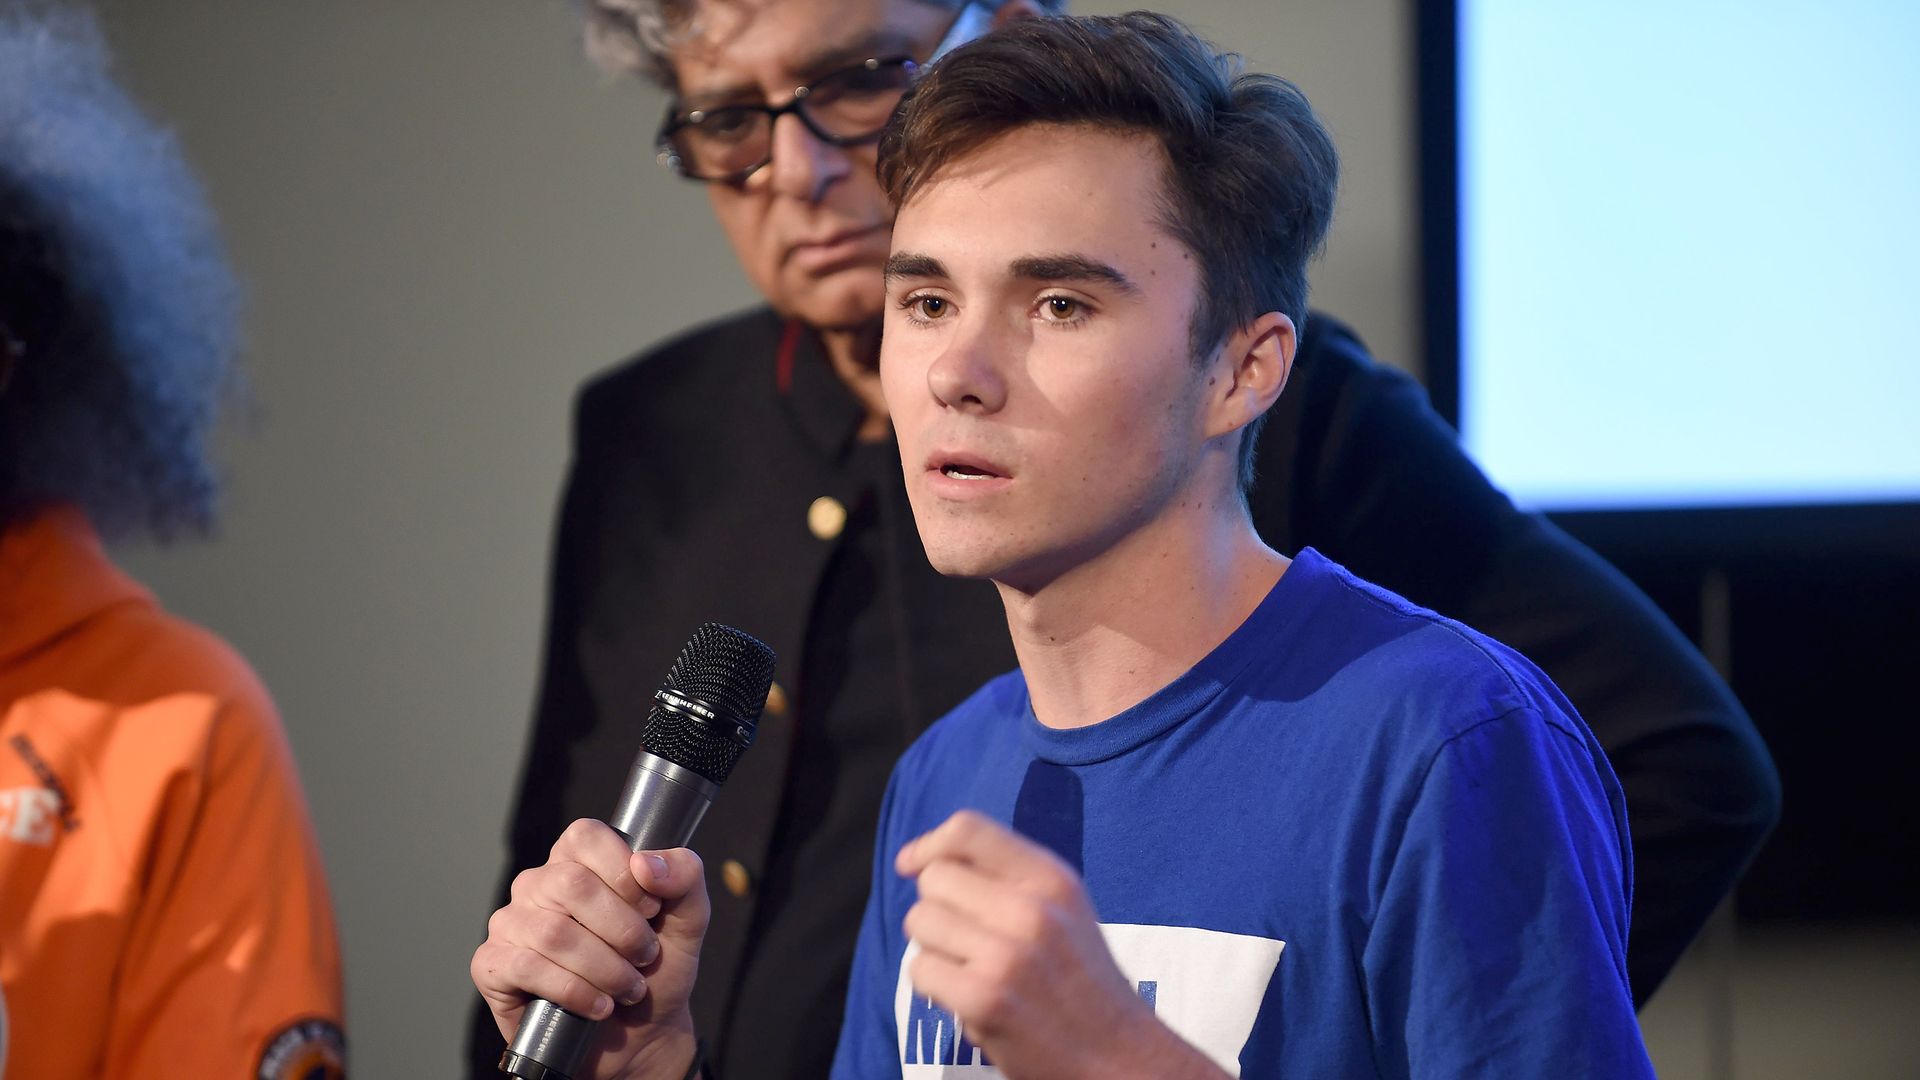 In this image, David Hogg speaks into a microphone while wearing a T shirt. 